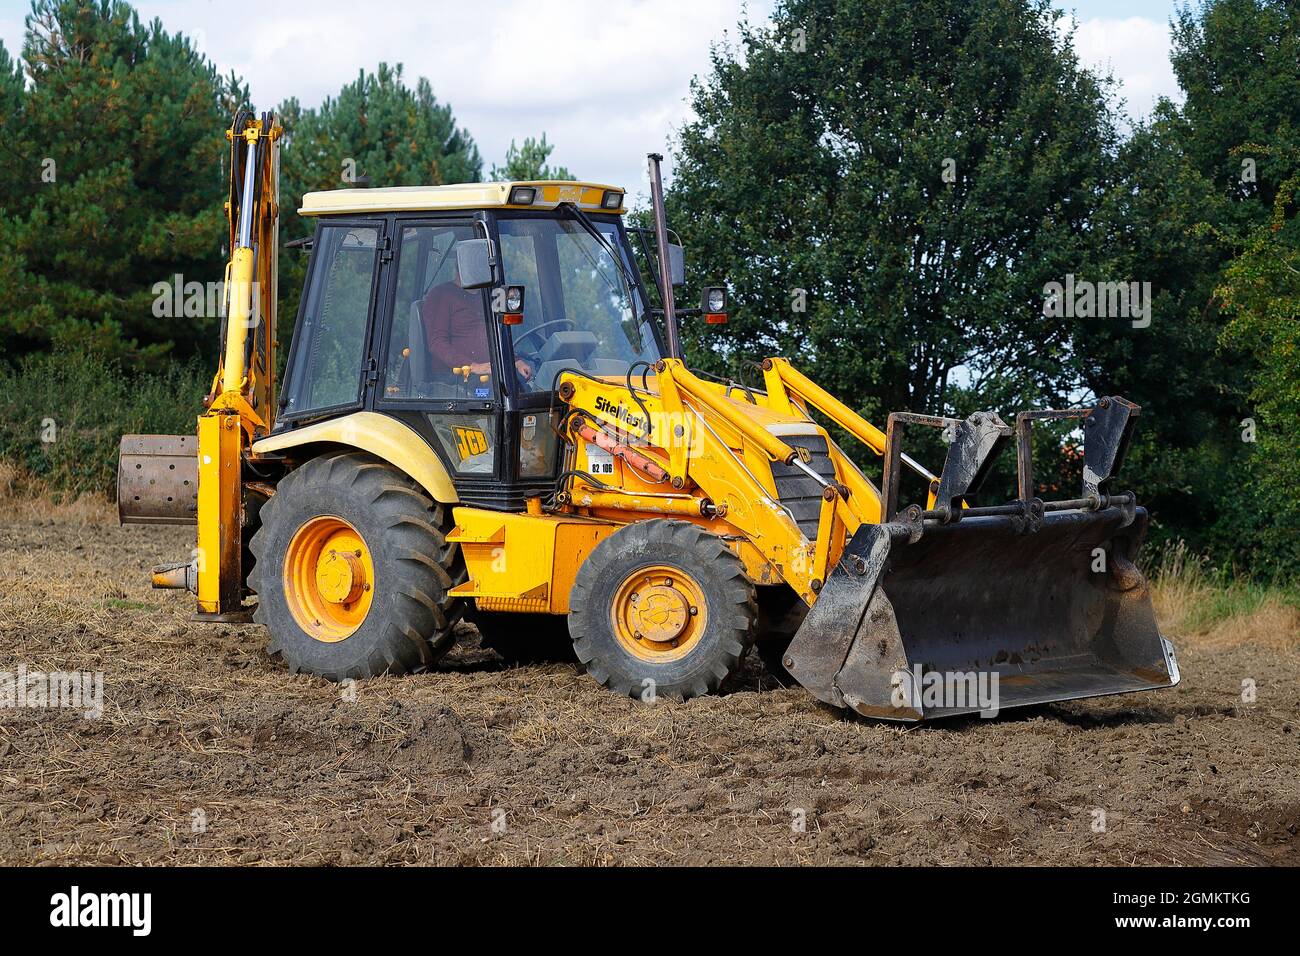 JCB Sitemaster at work in a field Stock Photo